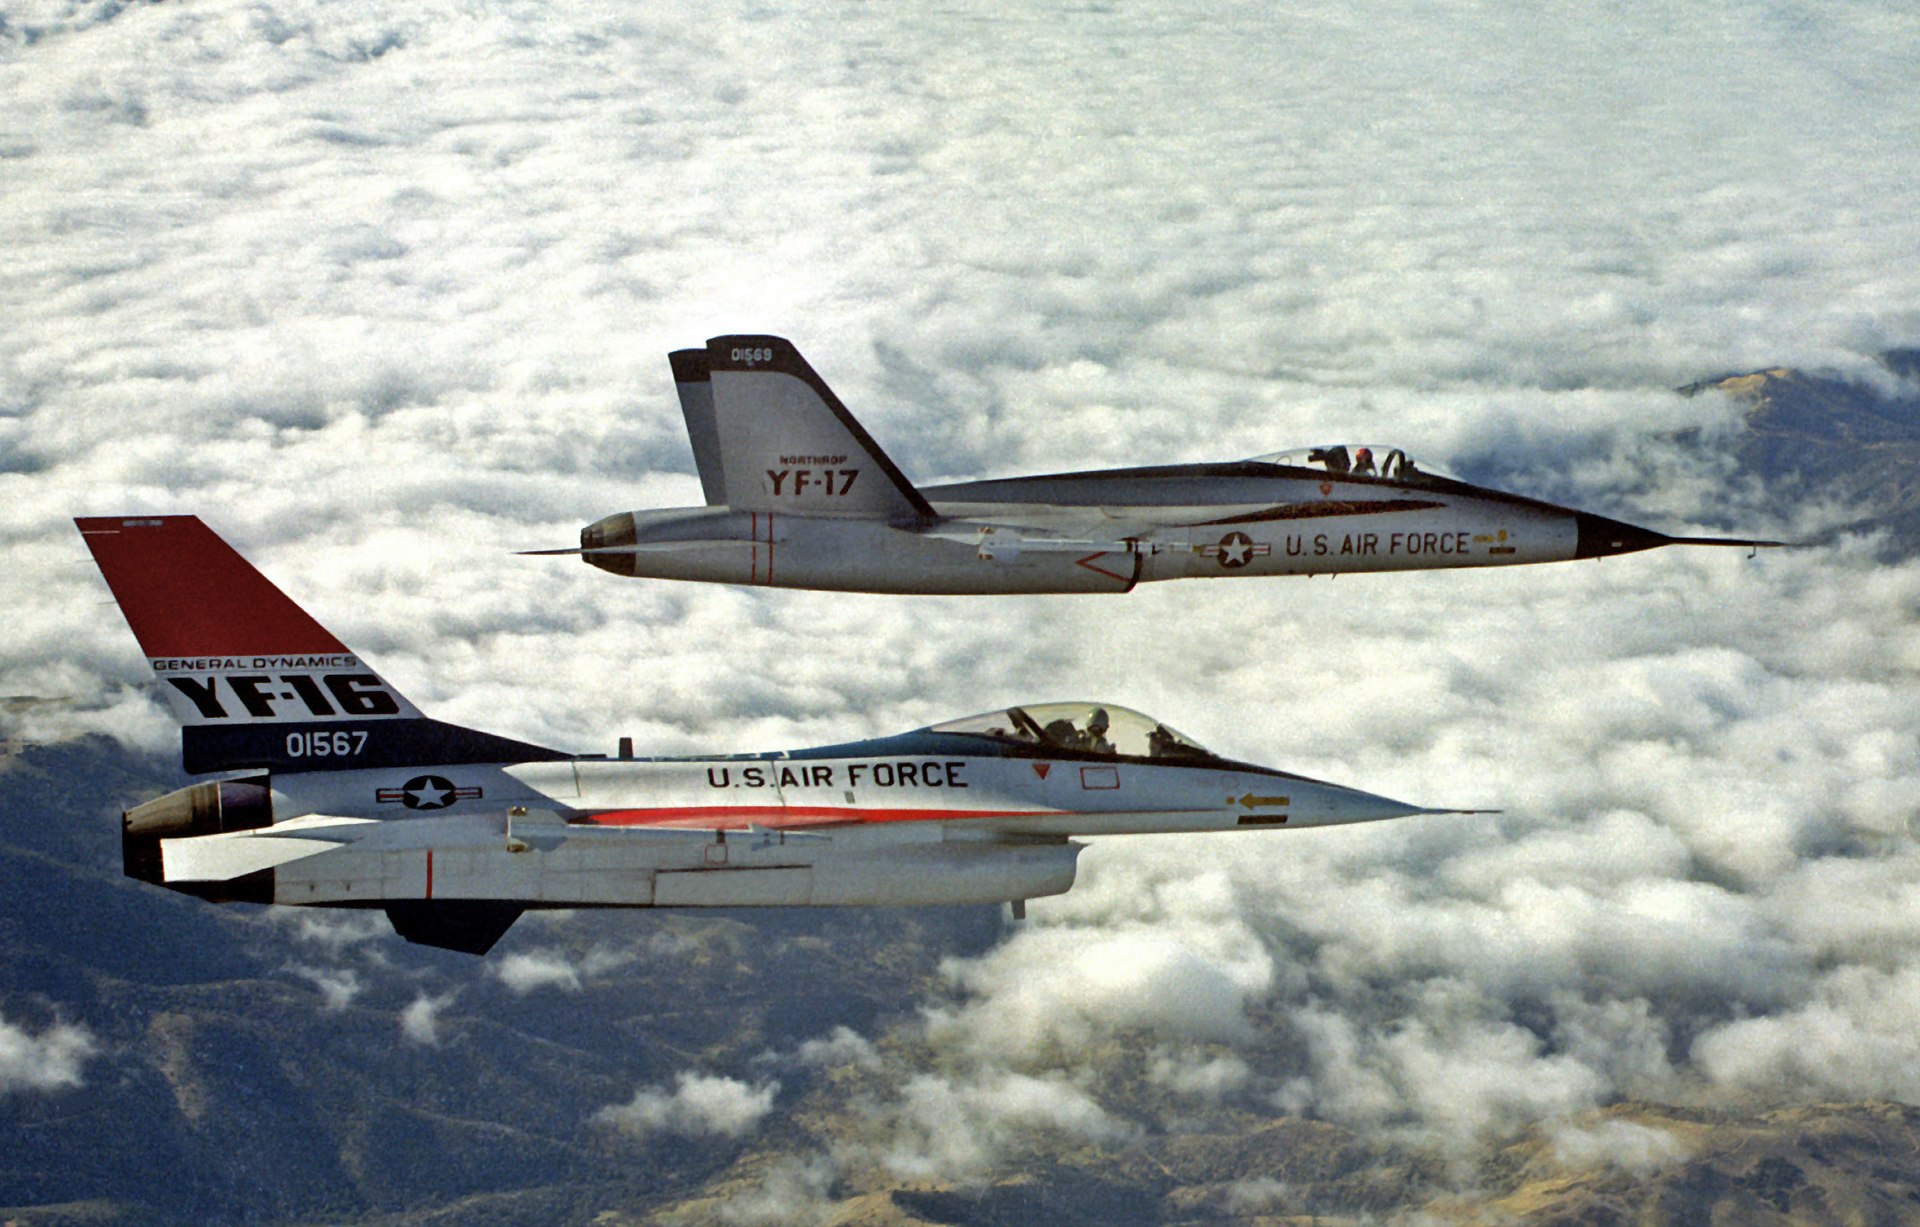 Von Air Force - http://www.dodmedia.osd.mil/Assets/1982/Air_Force/DF-SC-82-06297.JPEG, Gemeinfrei, https://commons.wikimedia.org/w/index.php?curid=4683275